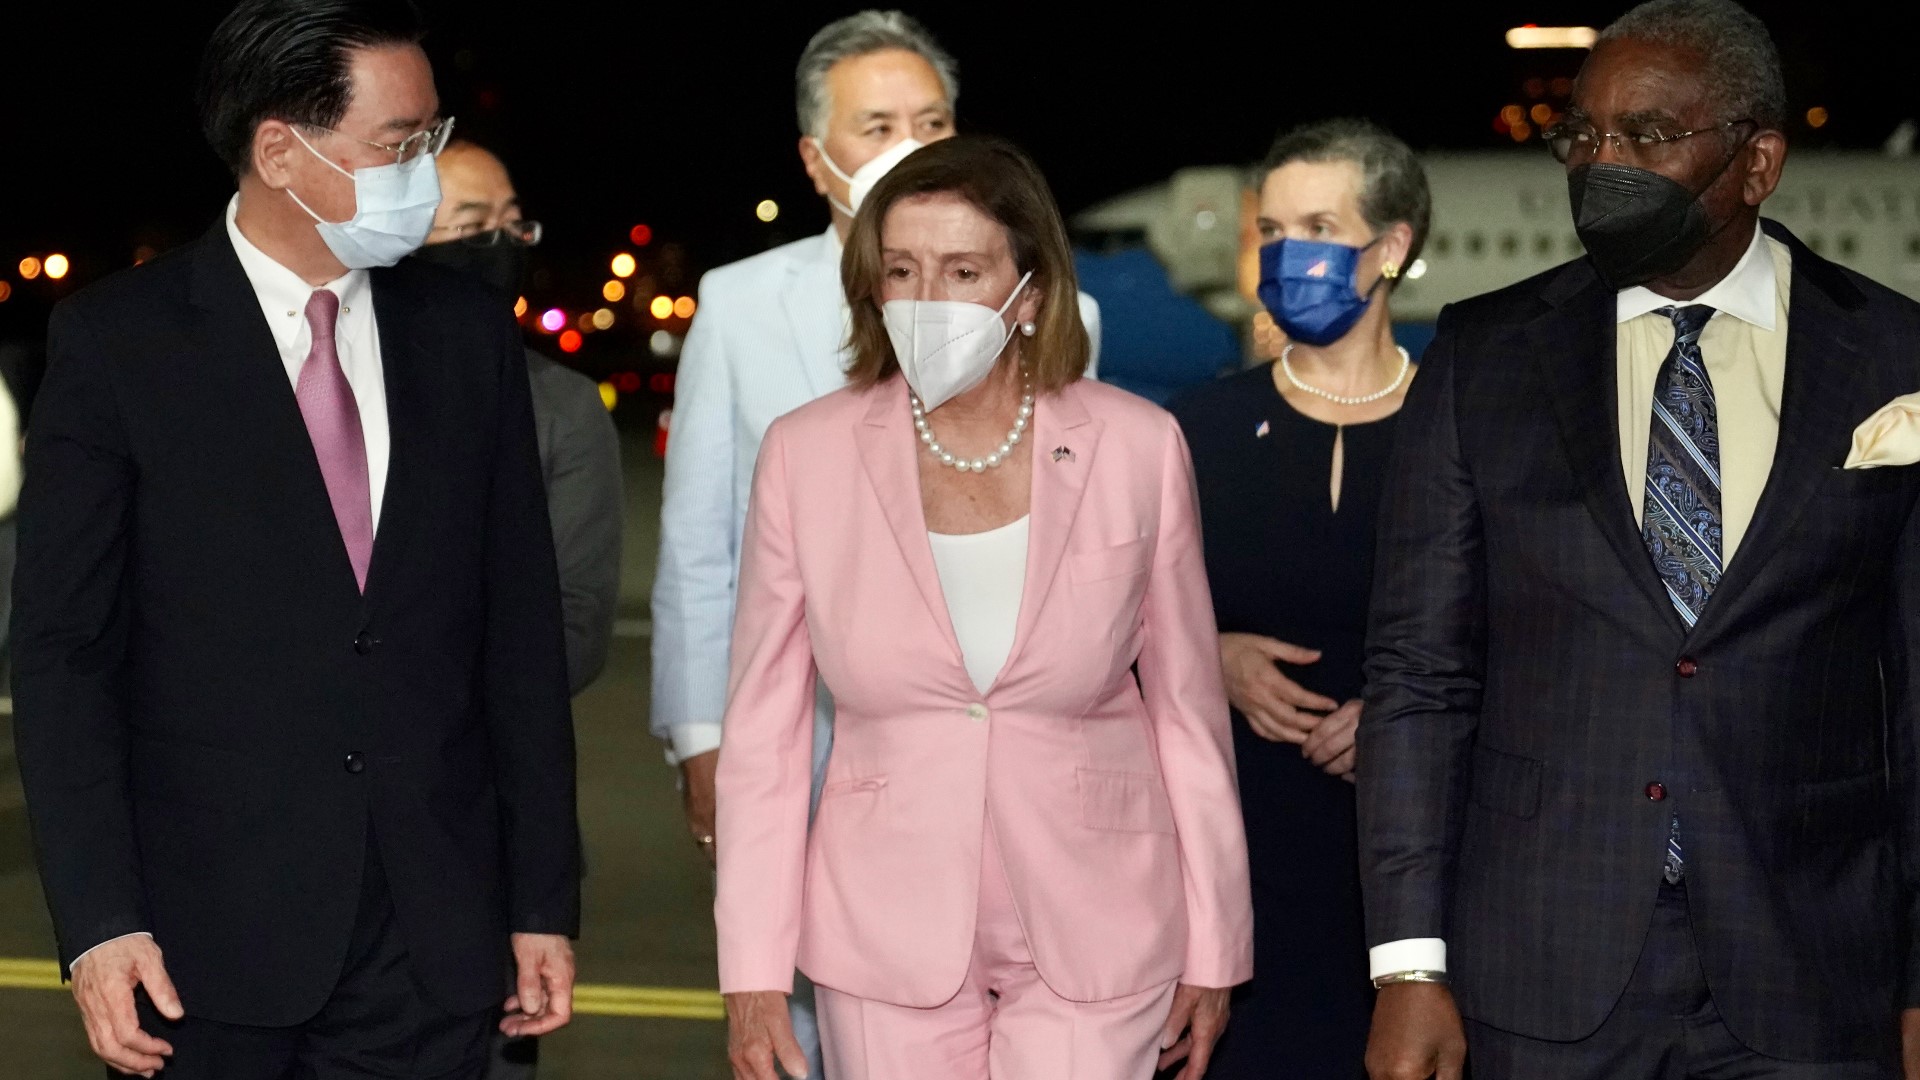 China announced new military operations off Taiwan, including live-fire drills, in the minutes and hours after Pelosi's arrival in Taiwan late Tuesday night.